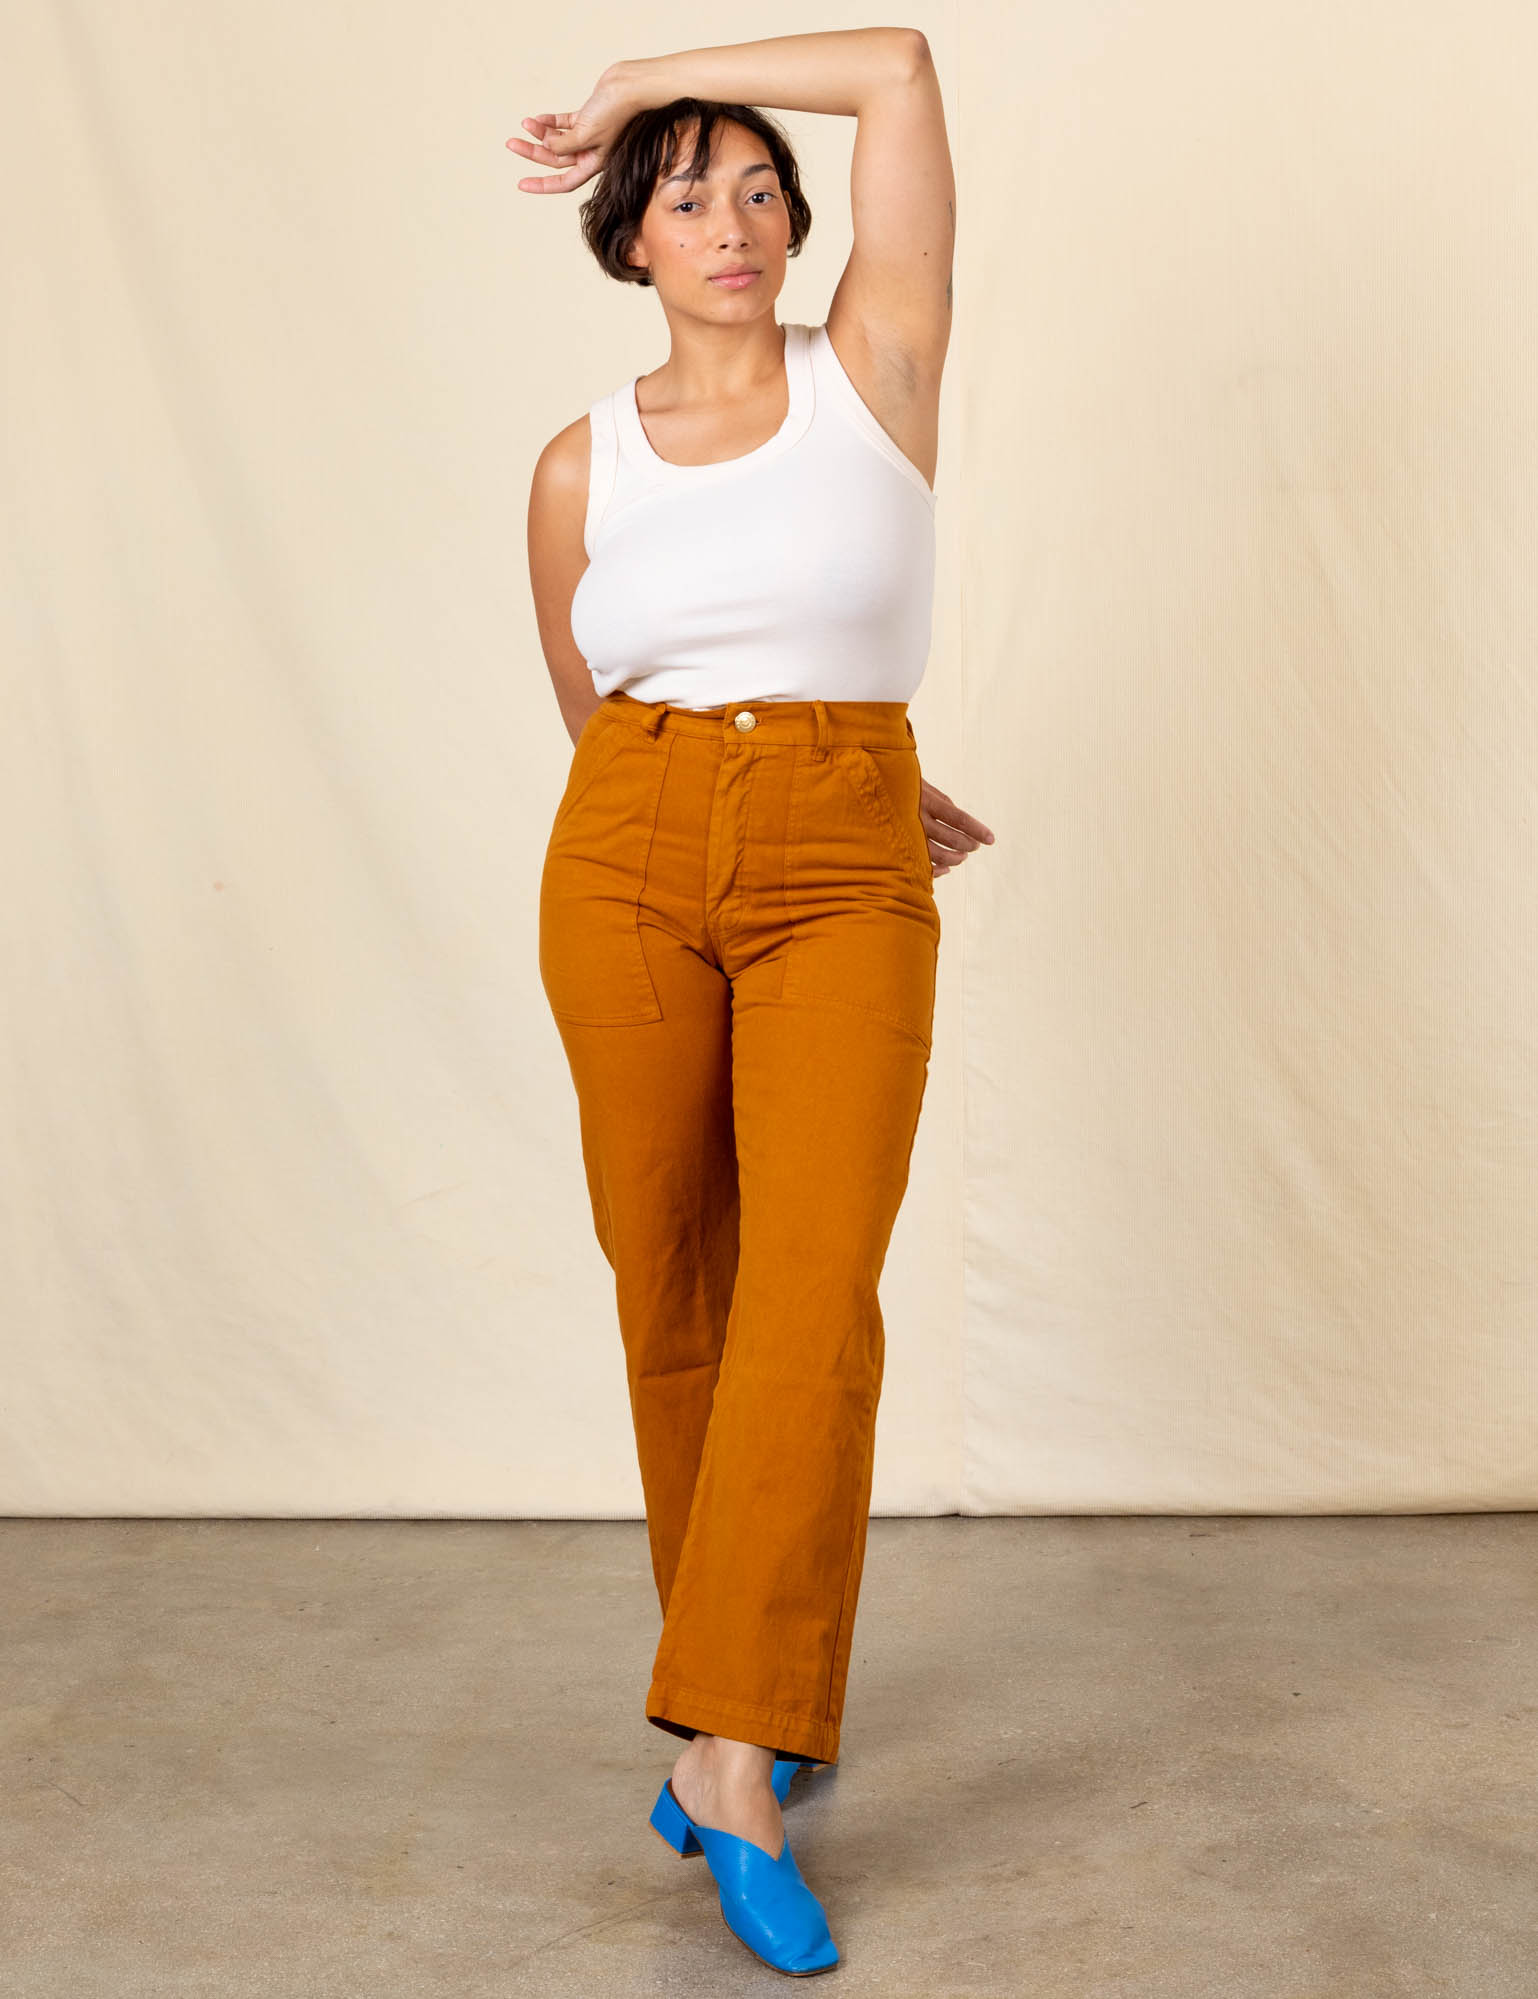 Tiara is 5&#39;4&quot; and wearing S Work Pants in Spicy Mustard paired with vintage off-white Tank Top